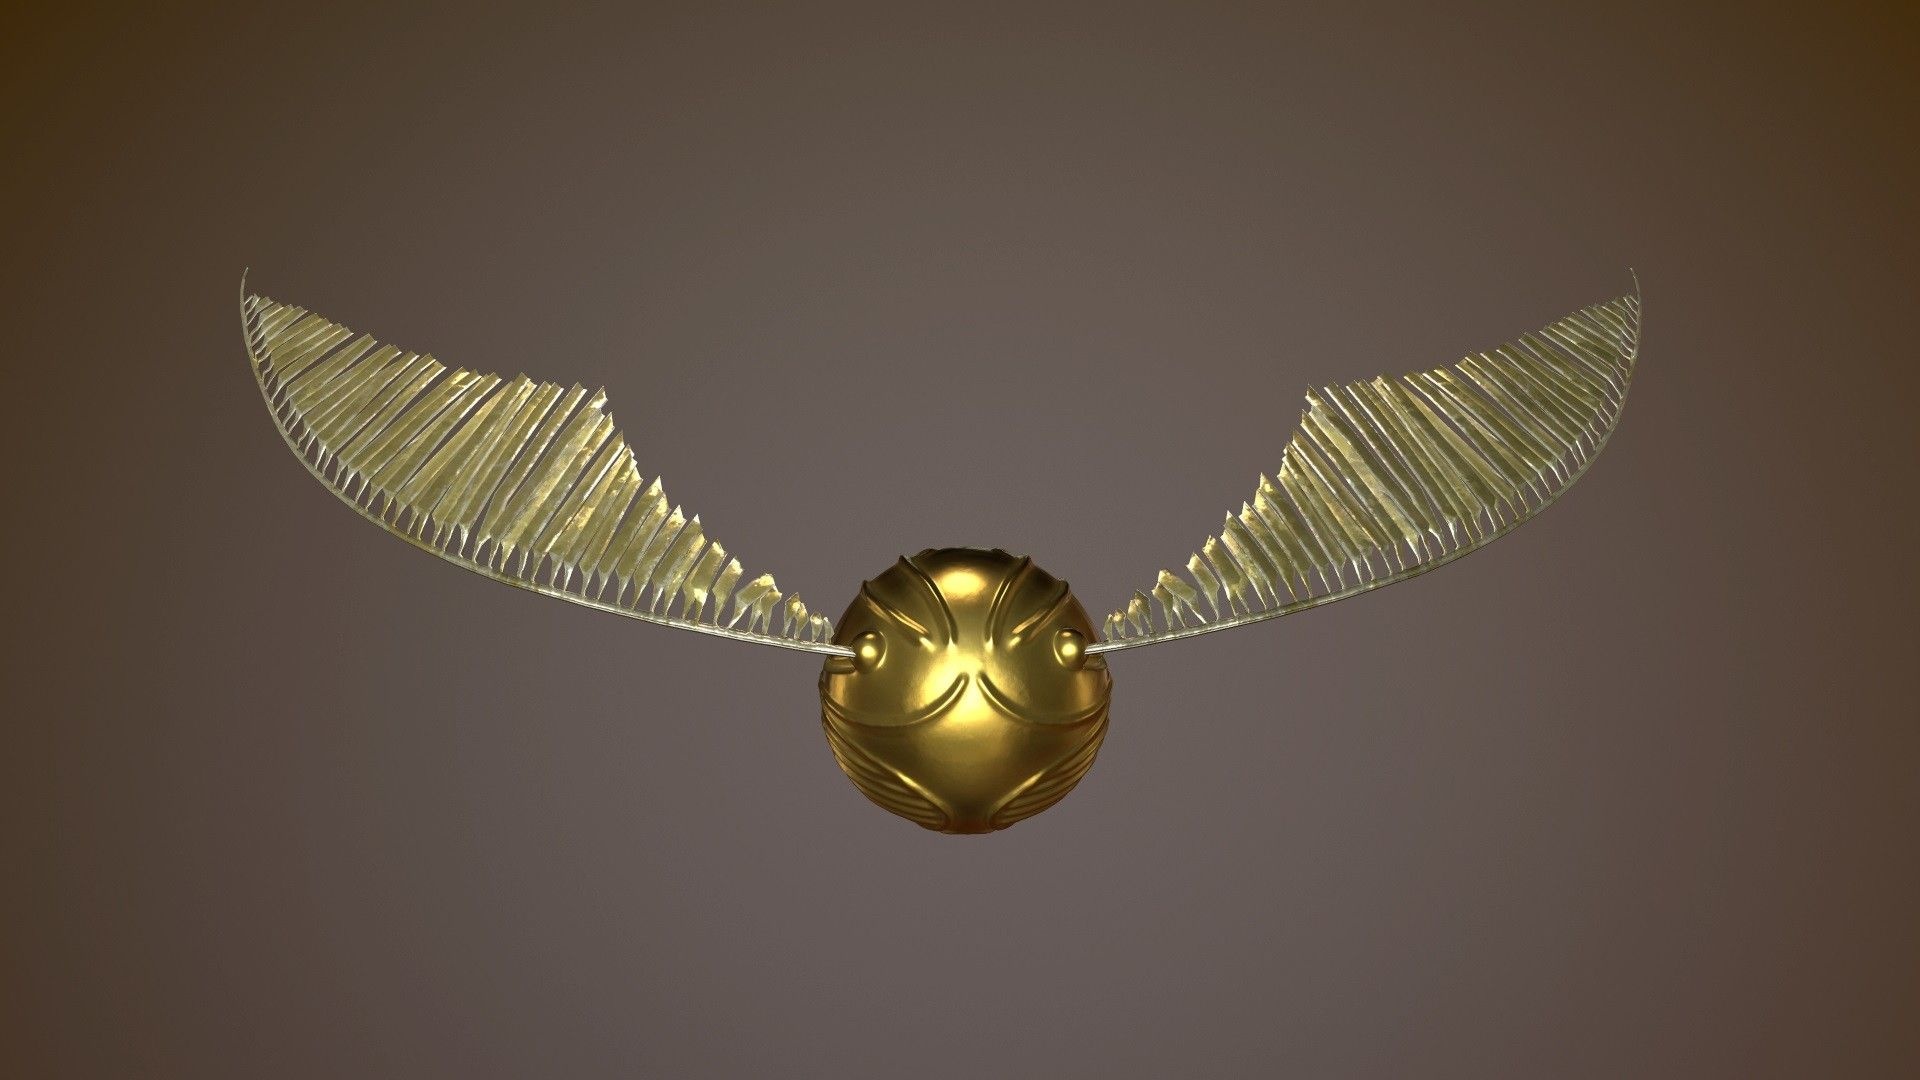 Golden Snitch, Movies, Golden Snitch wallpapers, Top free, 1920x1080 Full HD Desktop